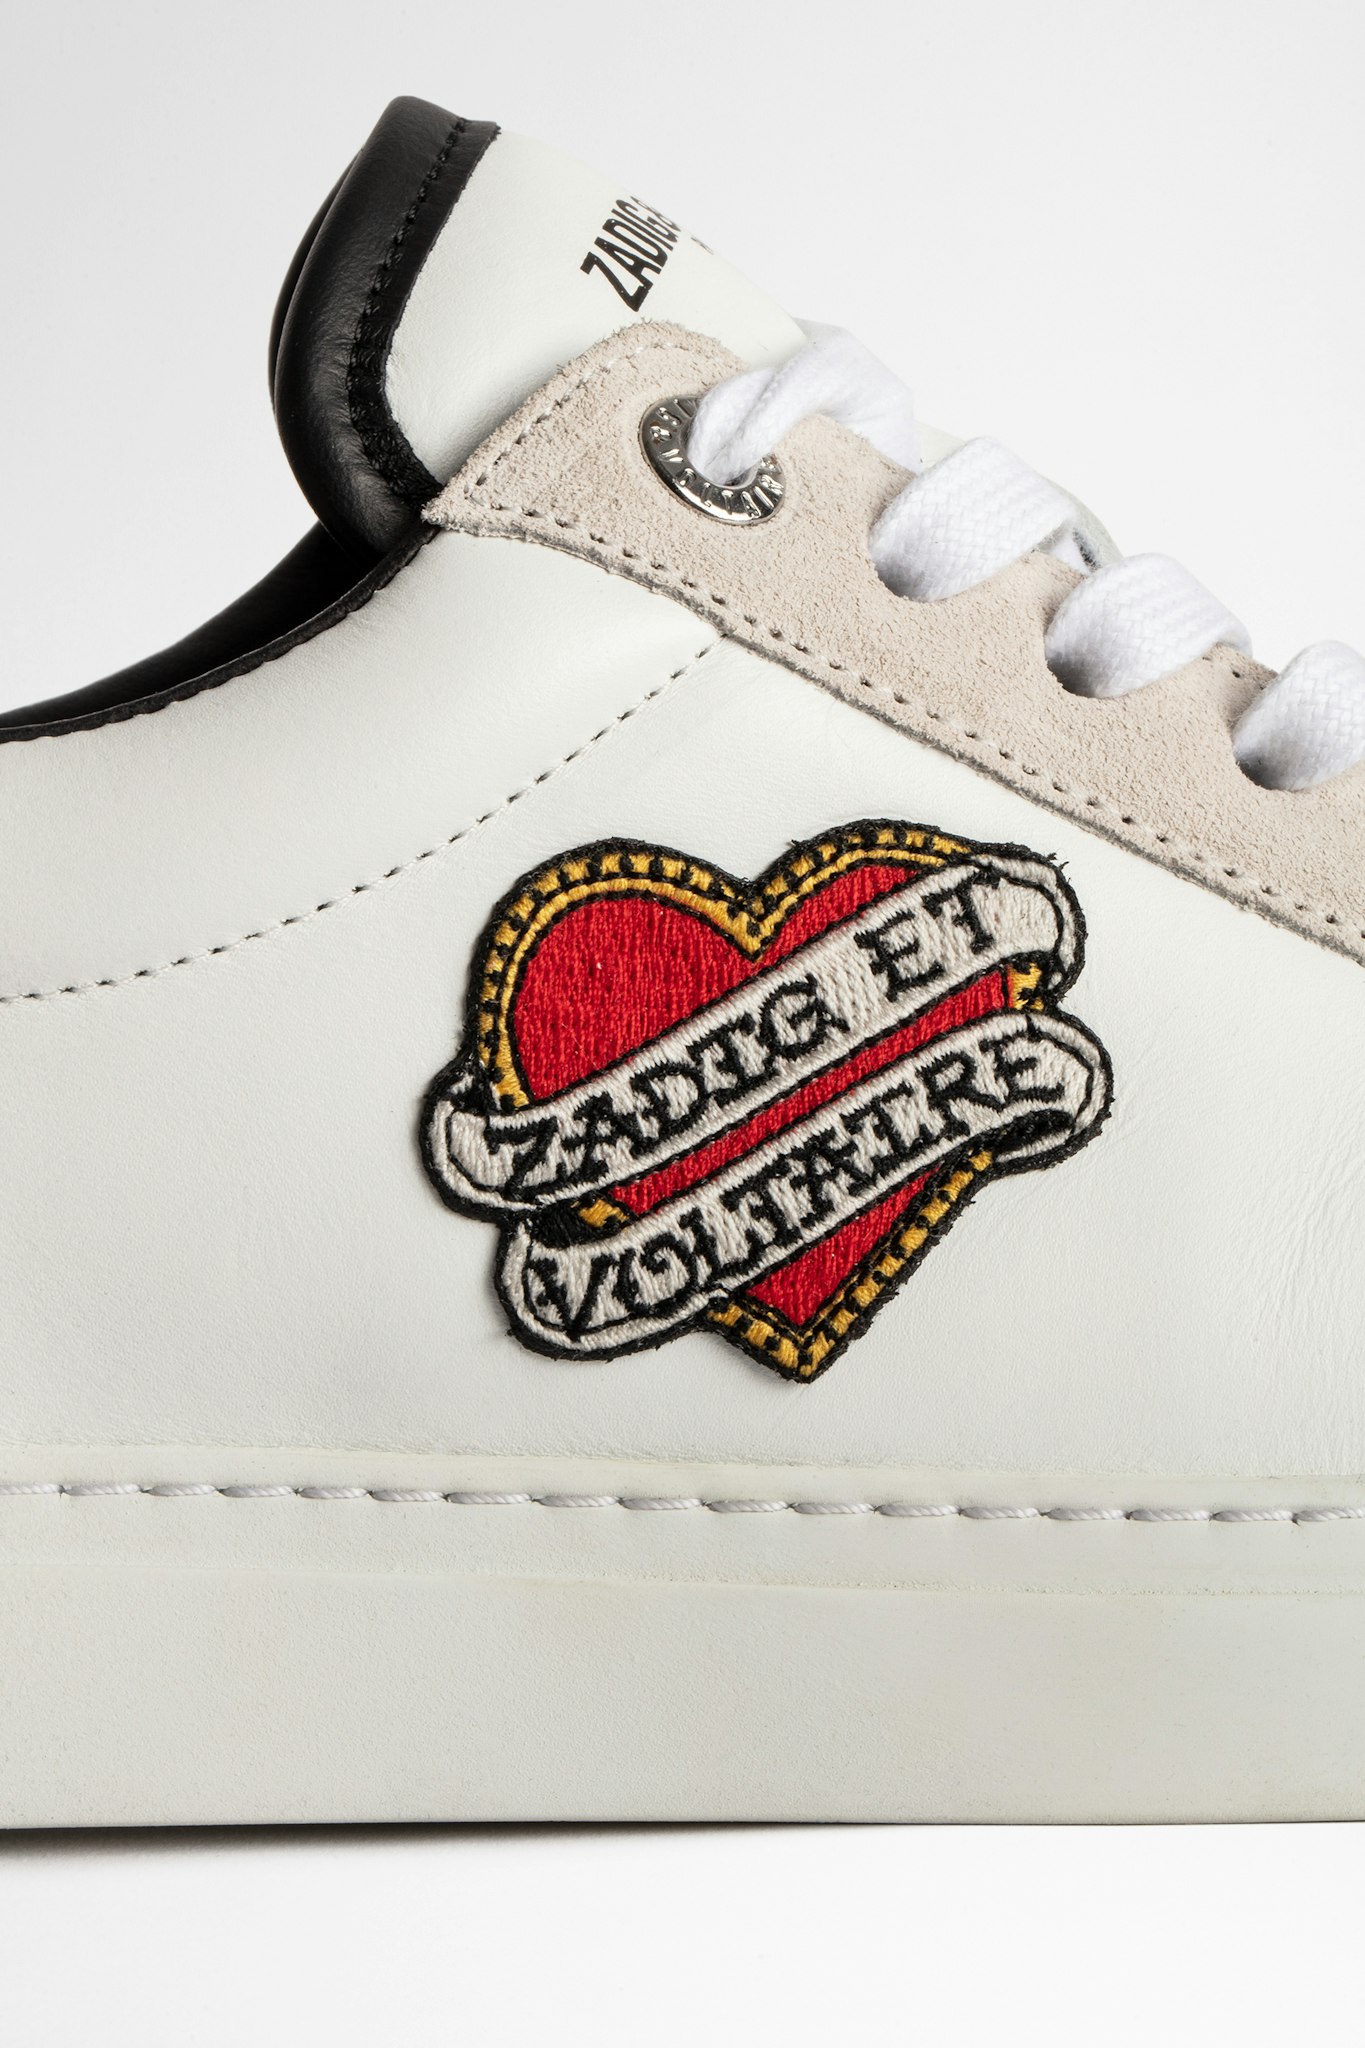 Sneakers ZV1747 Heart patch